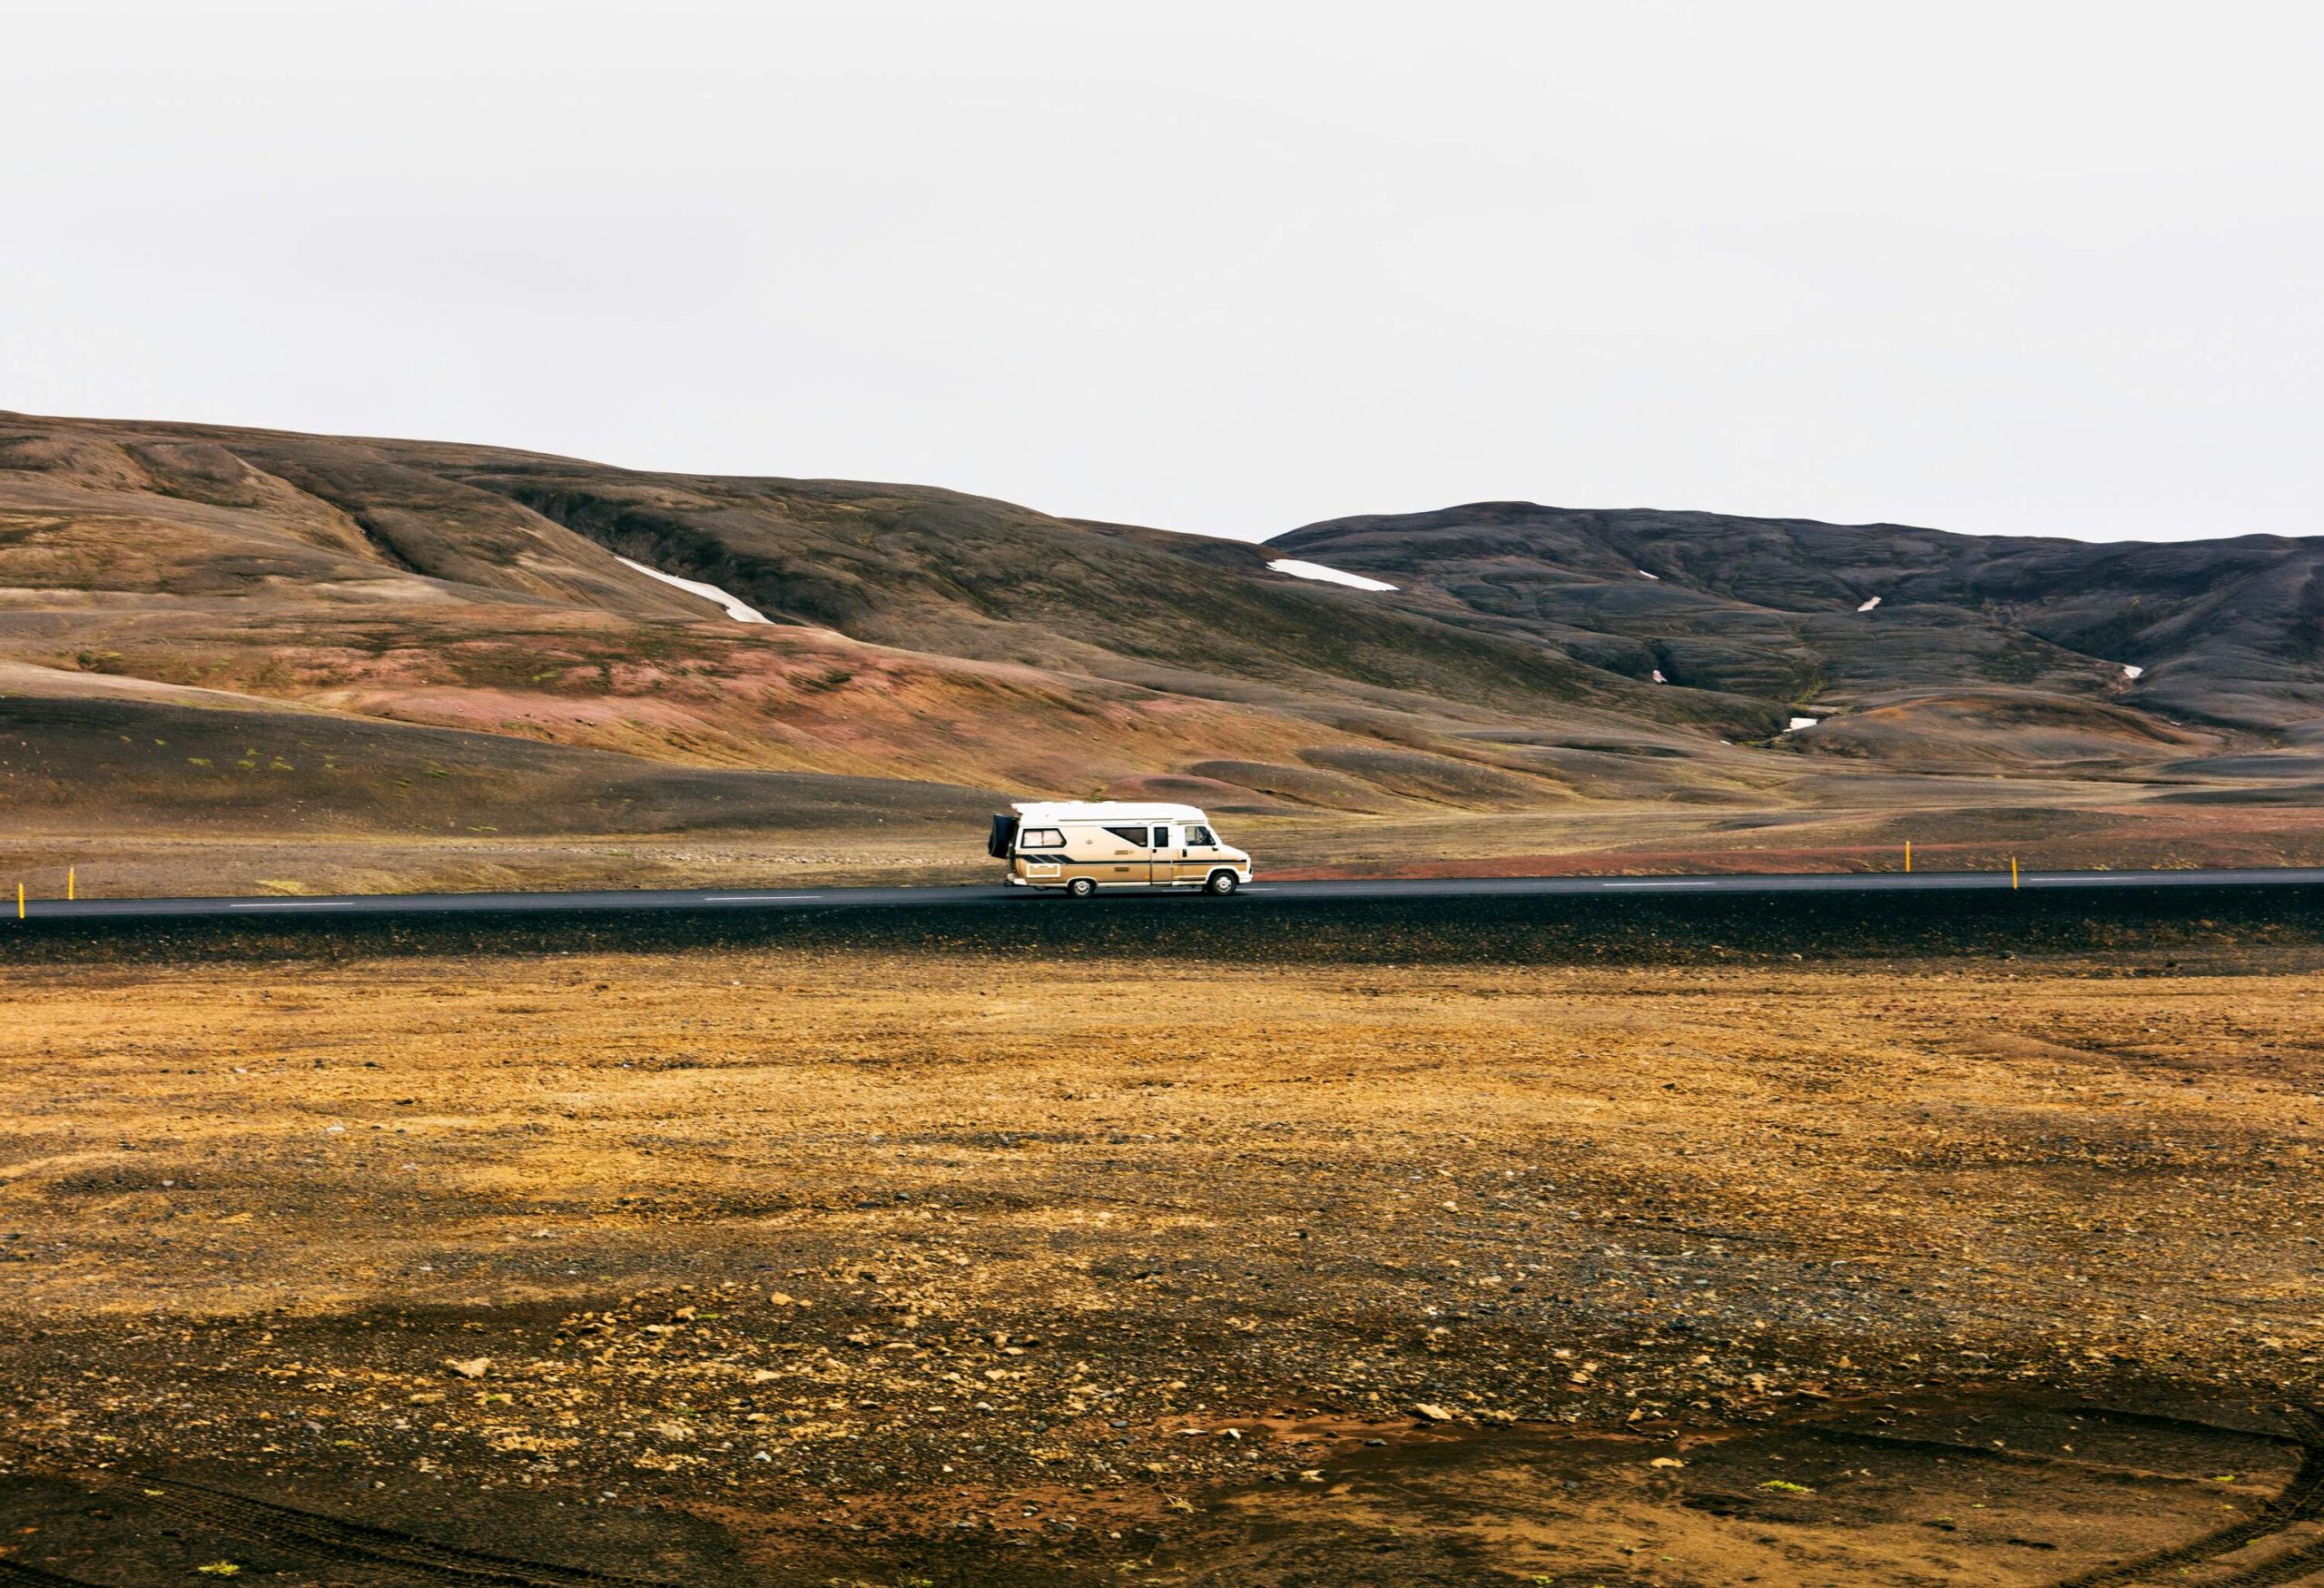 A motorhome travelling on a road between barren mountains and plains.